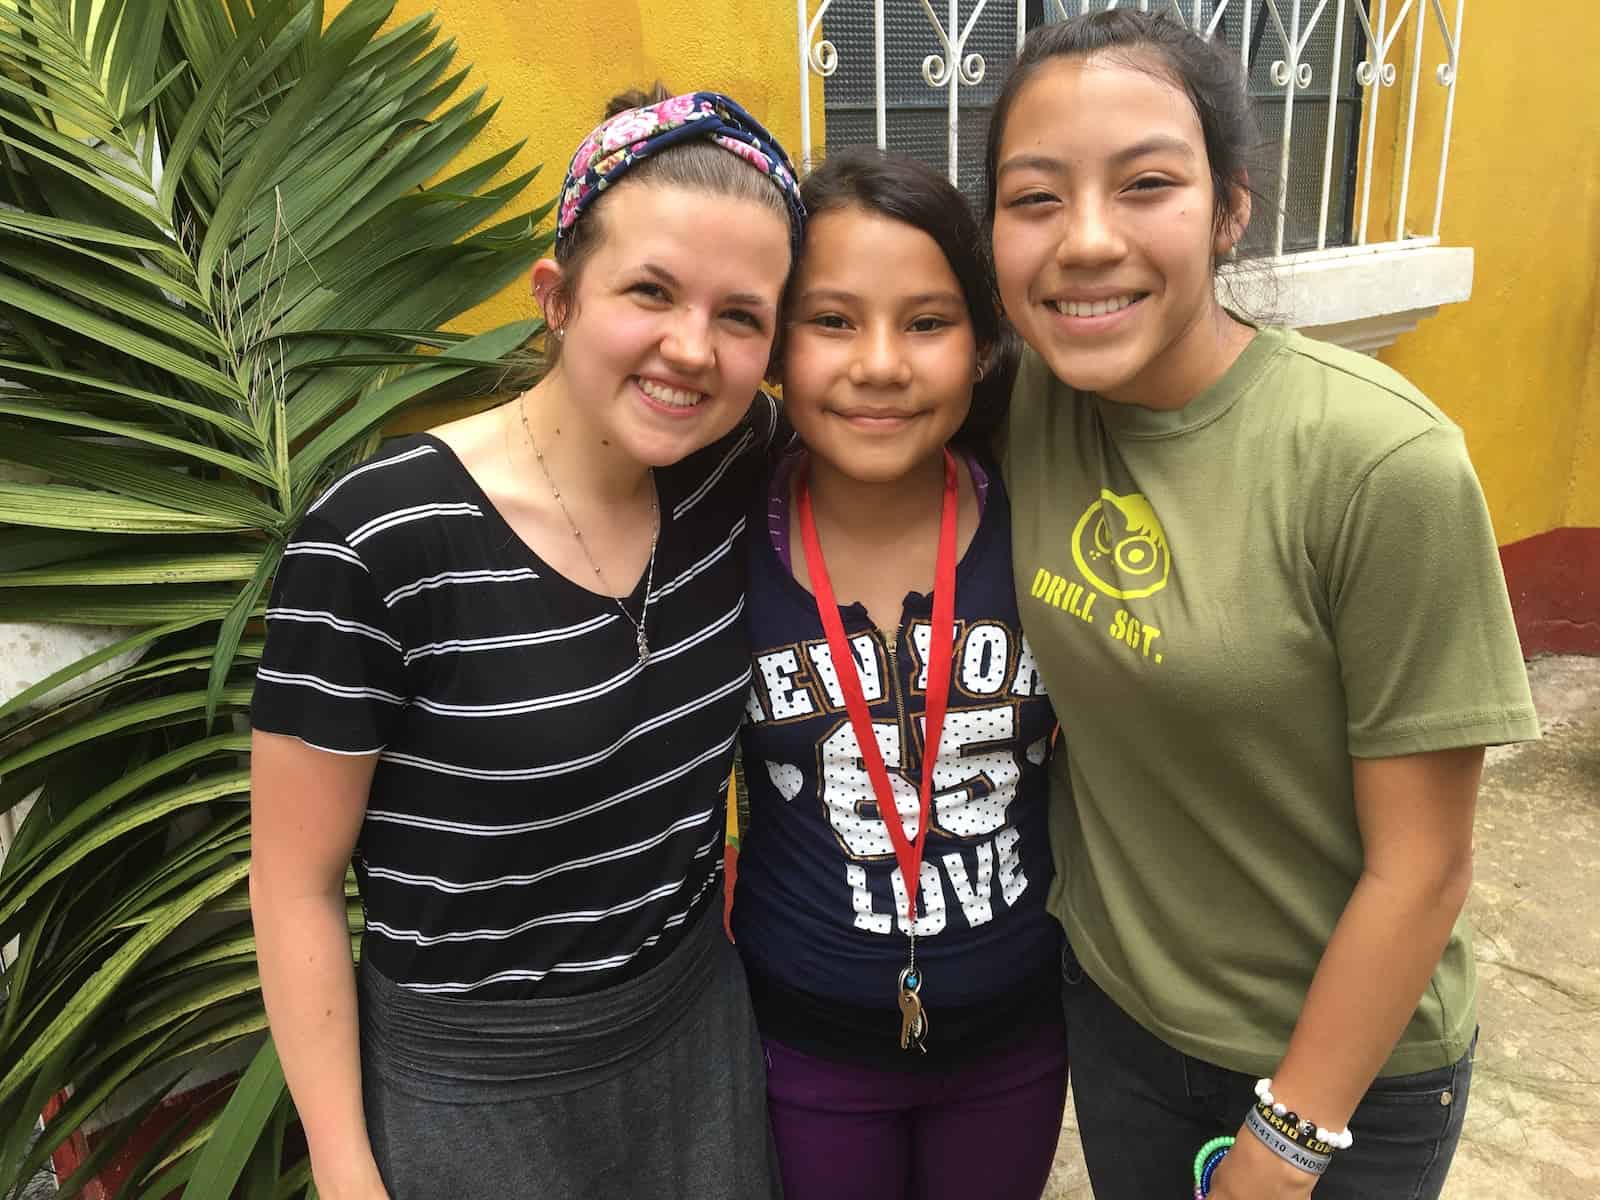 A young woman poses with two Guatemalan girls